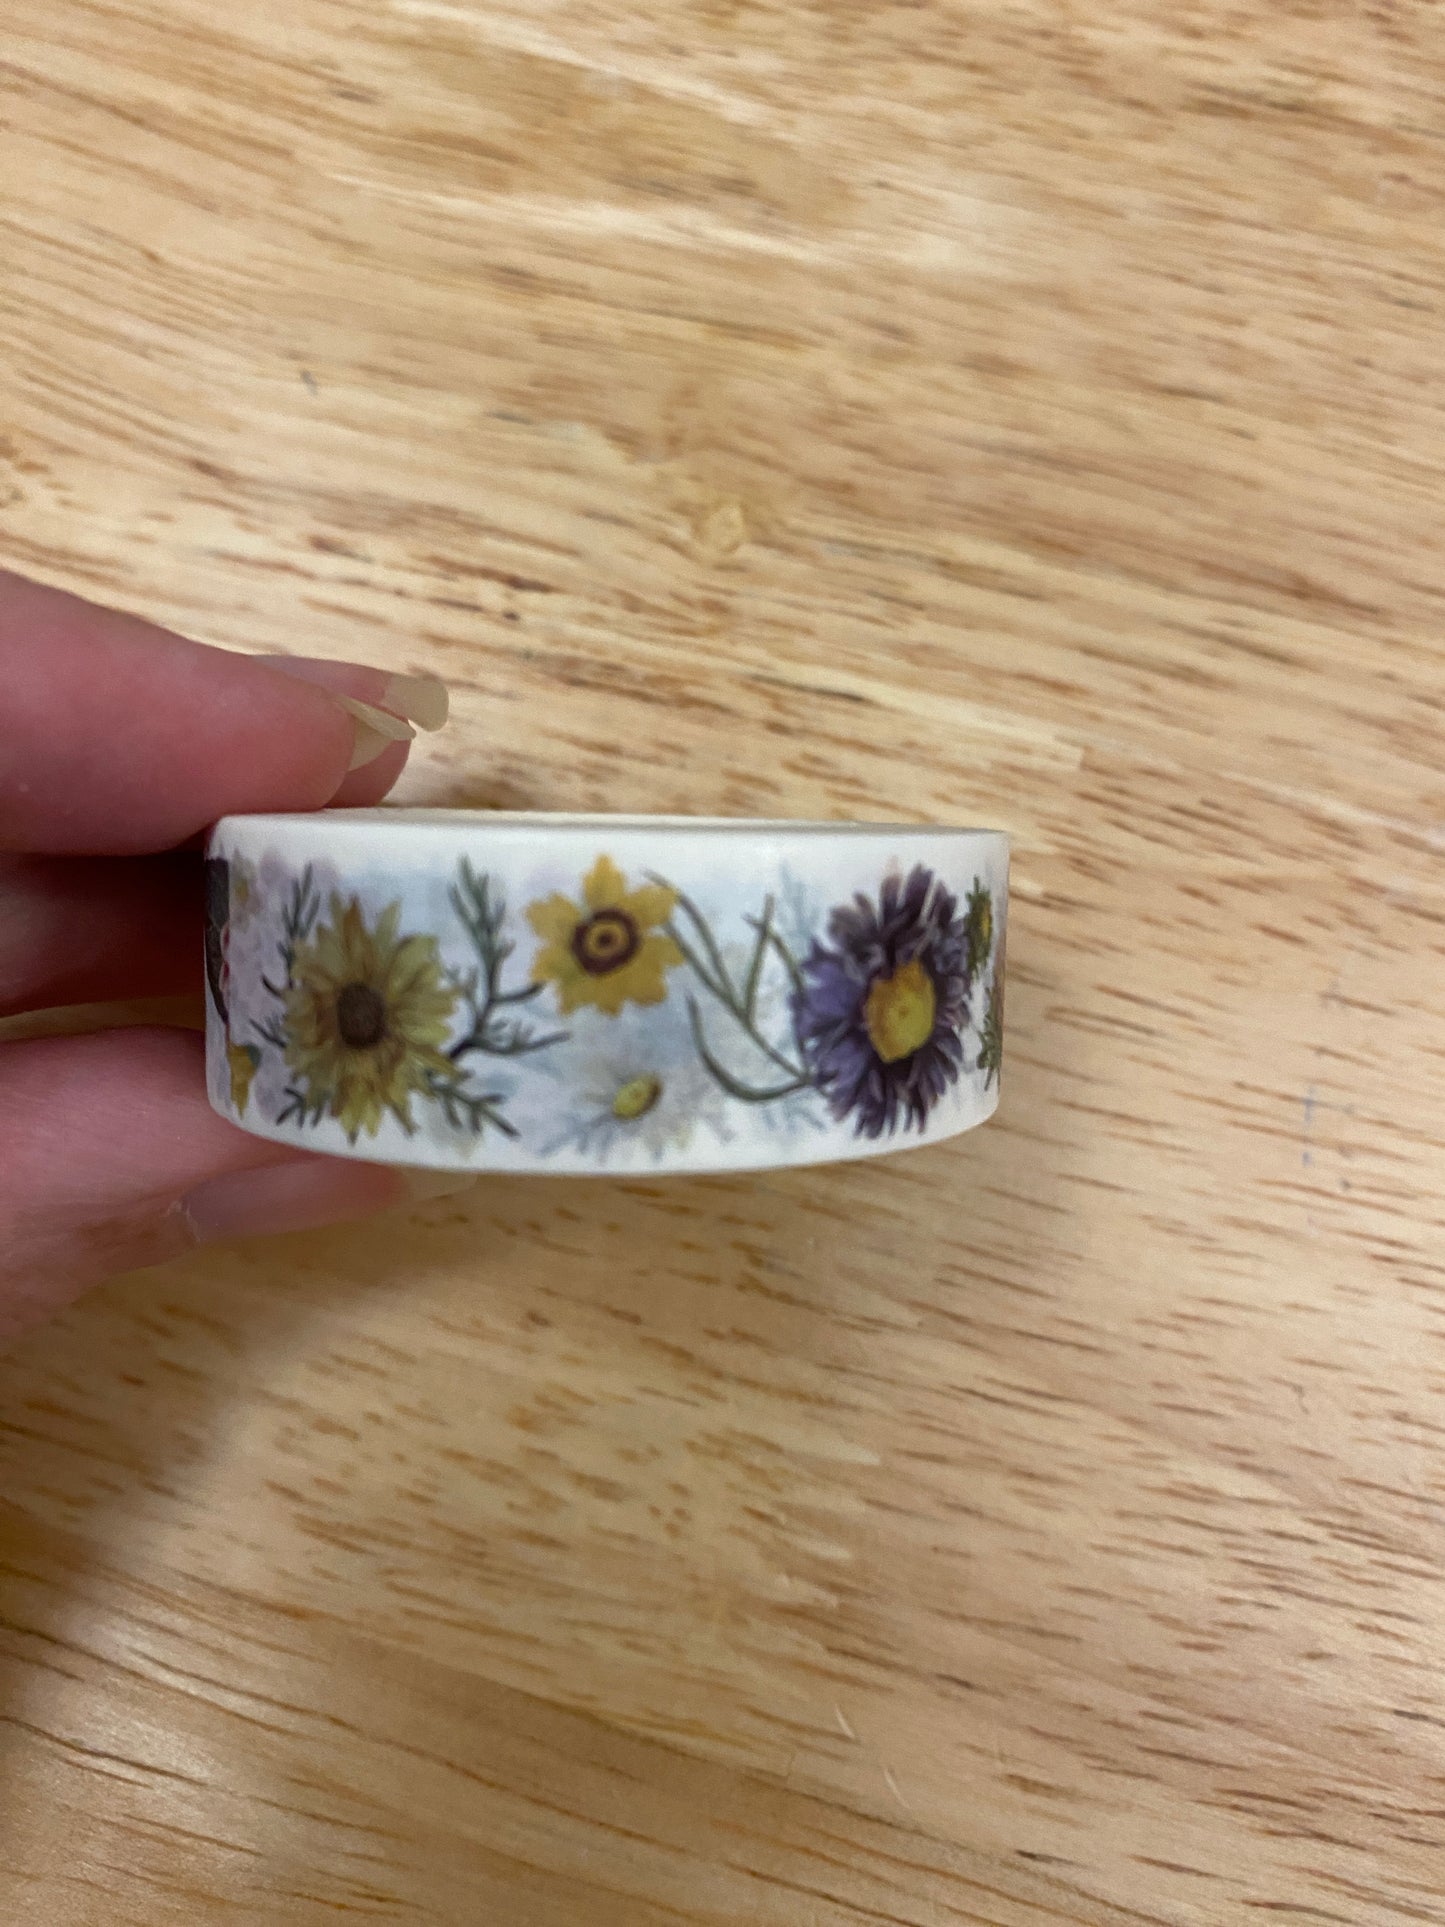 Big Roll of Wild Flowers Washi Tape, Flowers Washi Tape roll, Decorative Adhesive Masking Tapes, Floral Washi tape